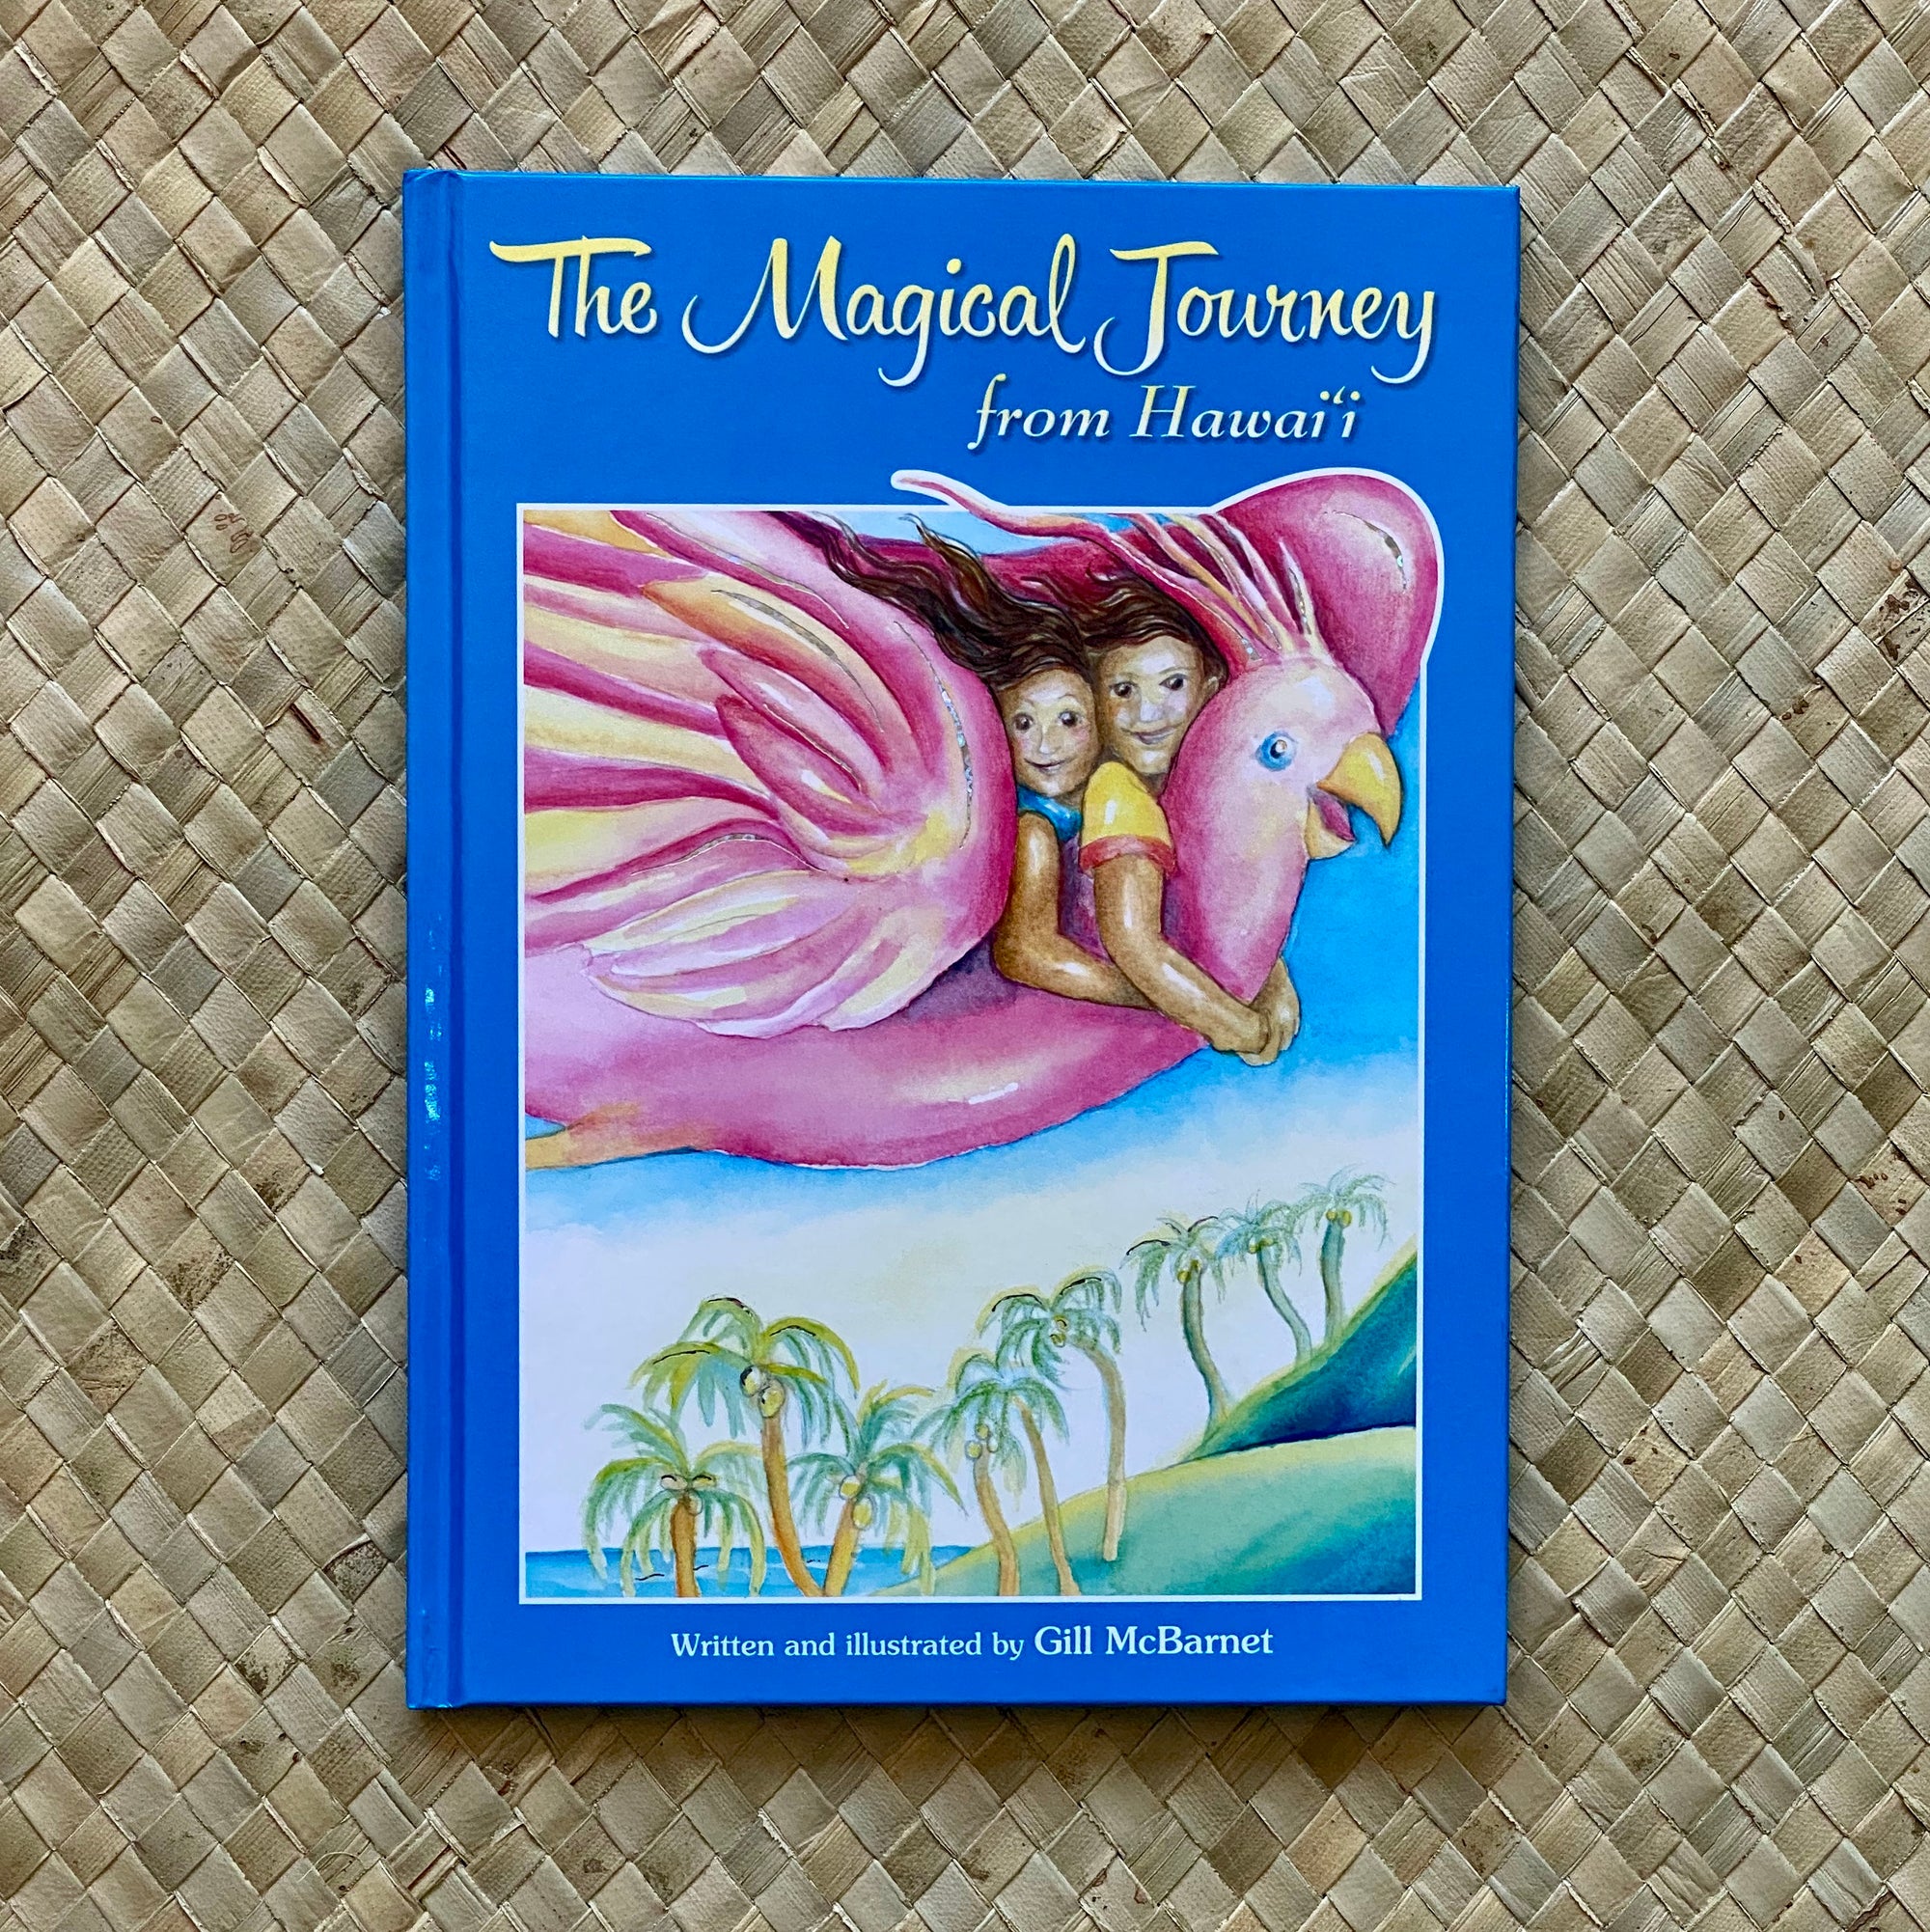 The Magical Journey from Hawaii